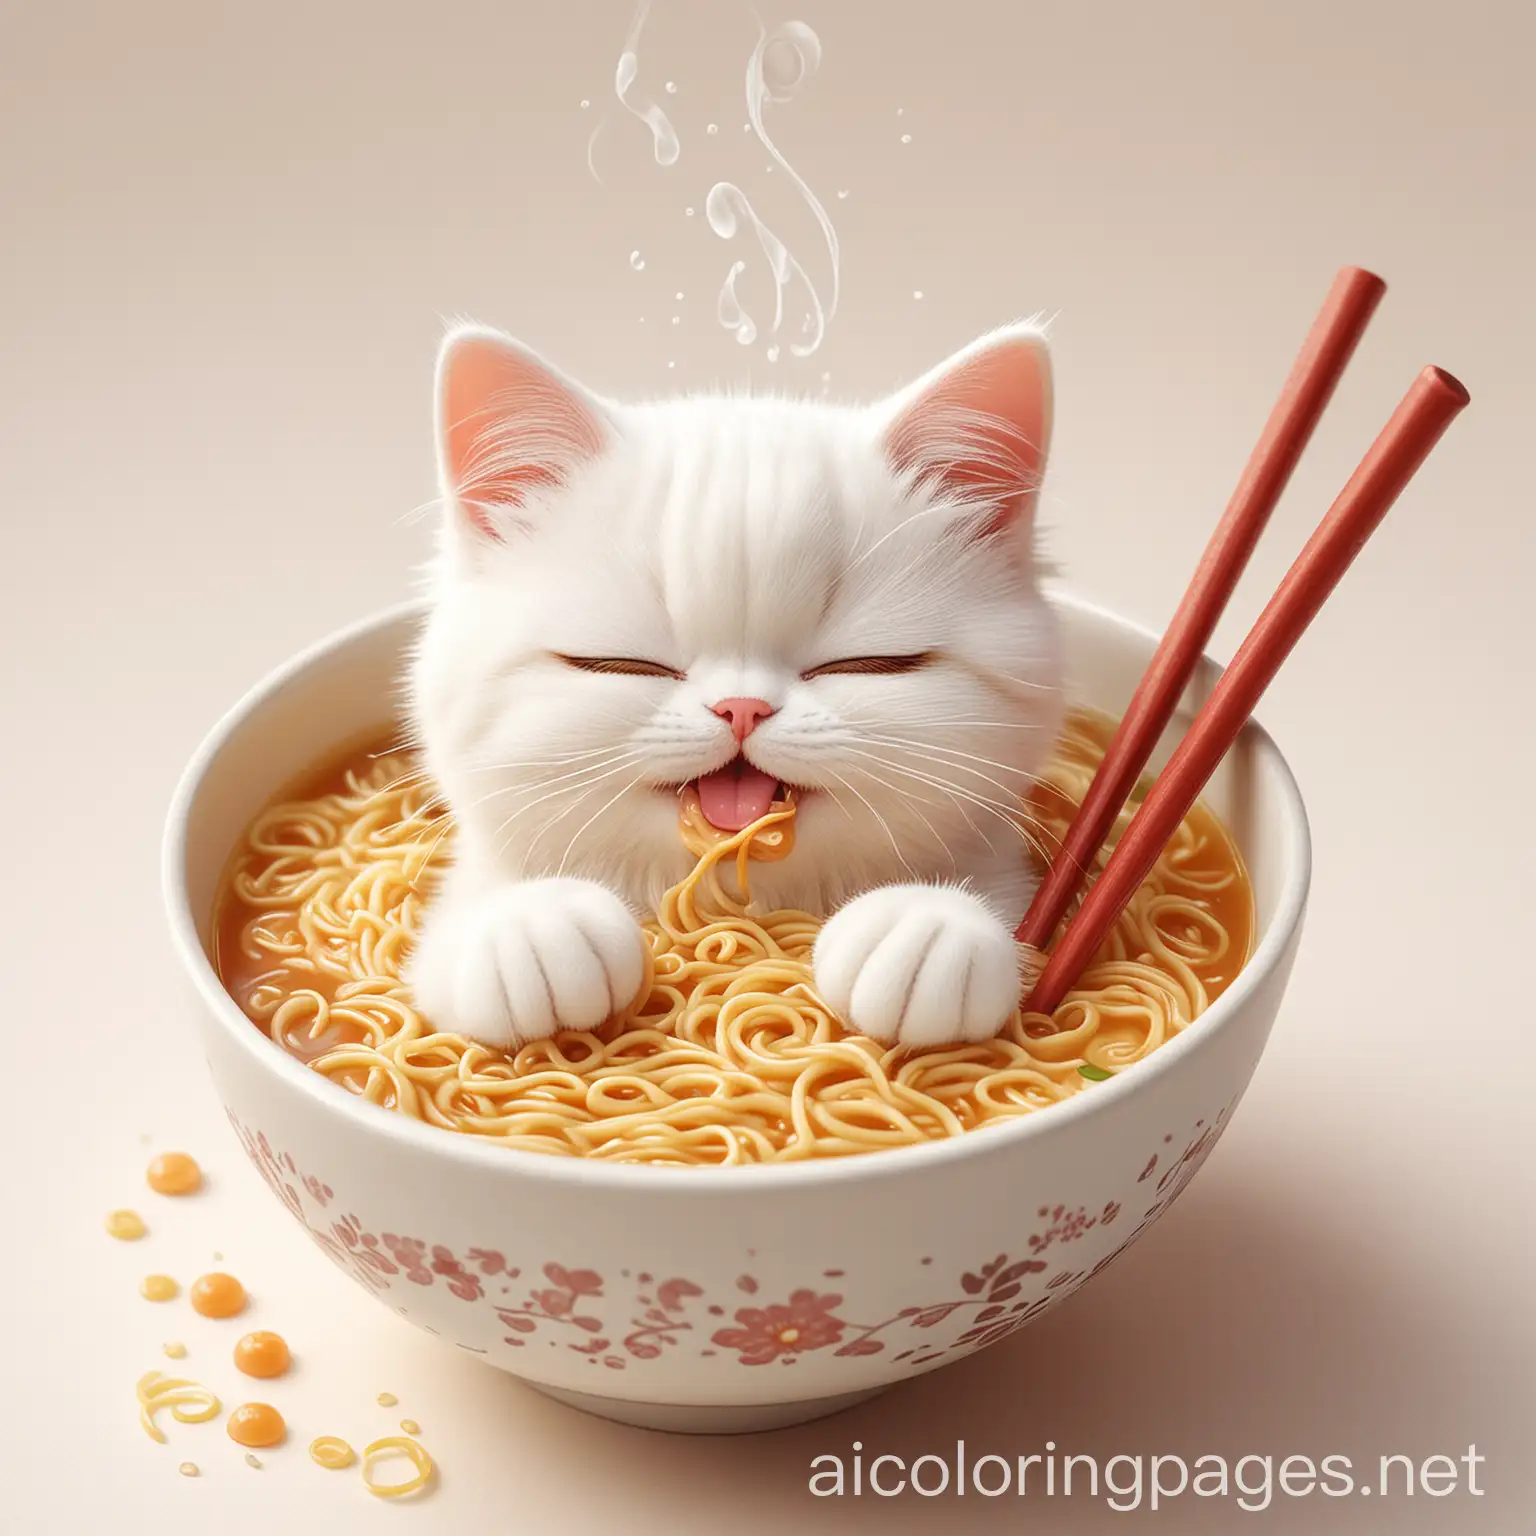 A charming illustration of an adorable, kawaii cat enjoying a bowl of steaming ramen. The cat's eyes are closed in pure bliss as it delicately picks up the noodles with a pair of chopsticks. The scene is set against a clean, white background, with tiny bubbles rising from the simmering broth. The cat's soft fur radiates a warm, inviting light, adding to the cute and comforting ambiance. The illustration beautifully captures the essence of simple pleasure and happiness, making it the epitome of contentment.